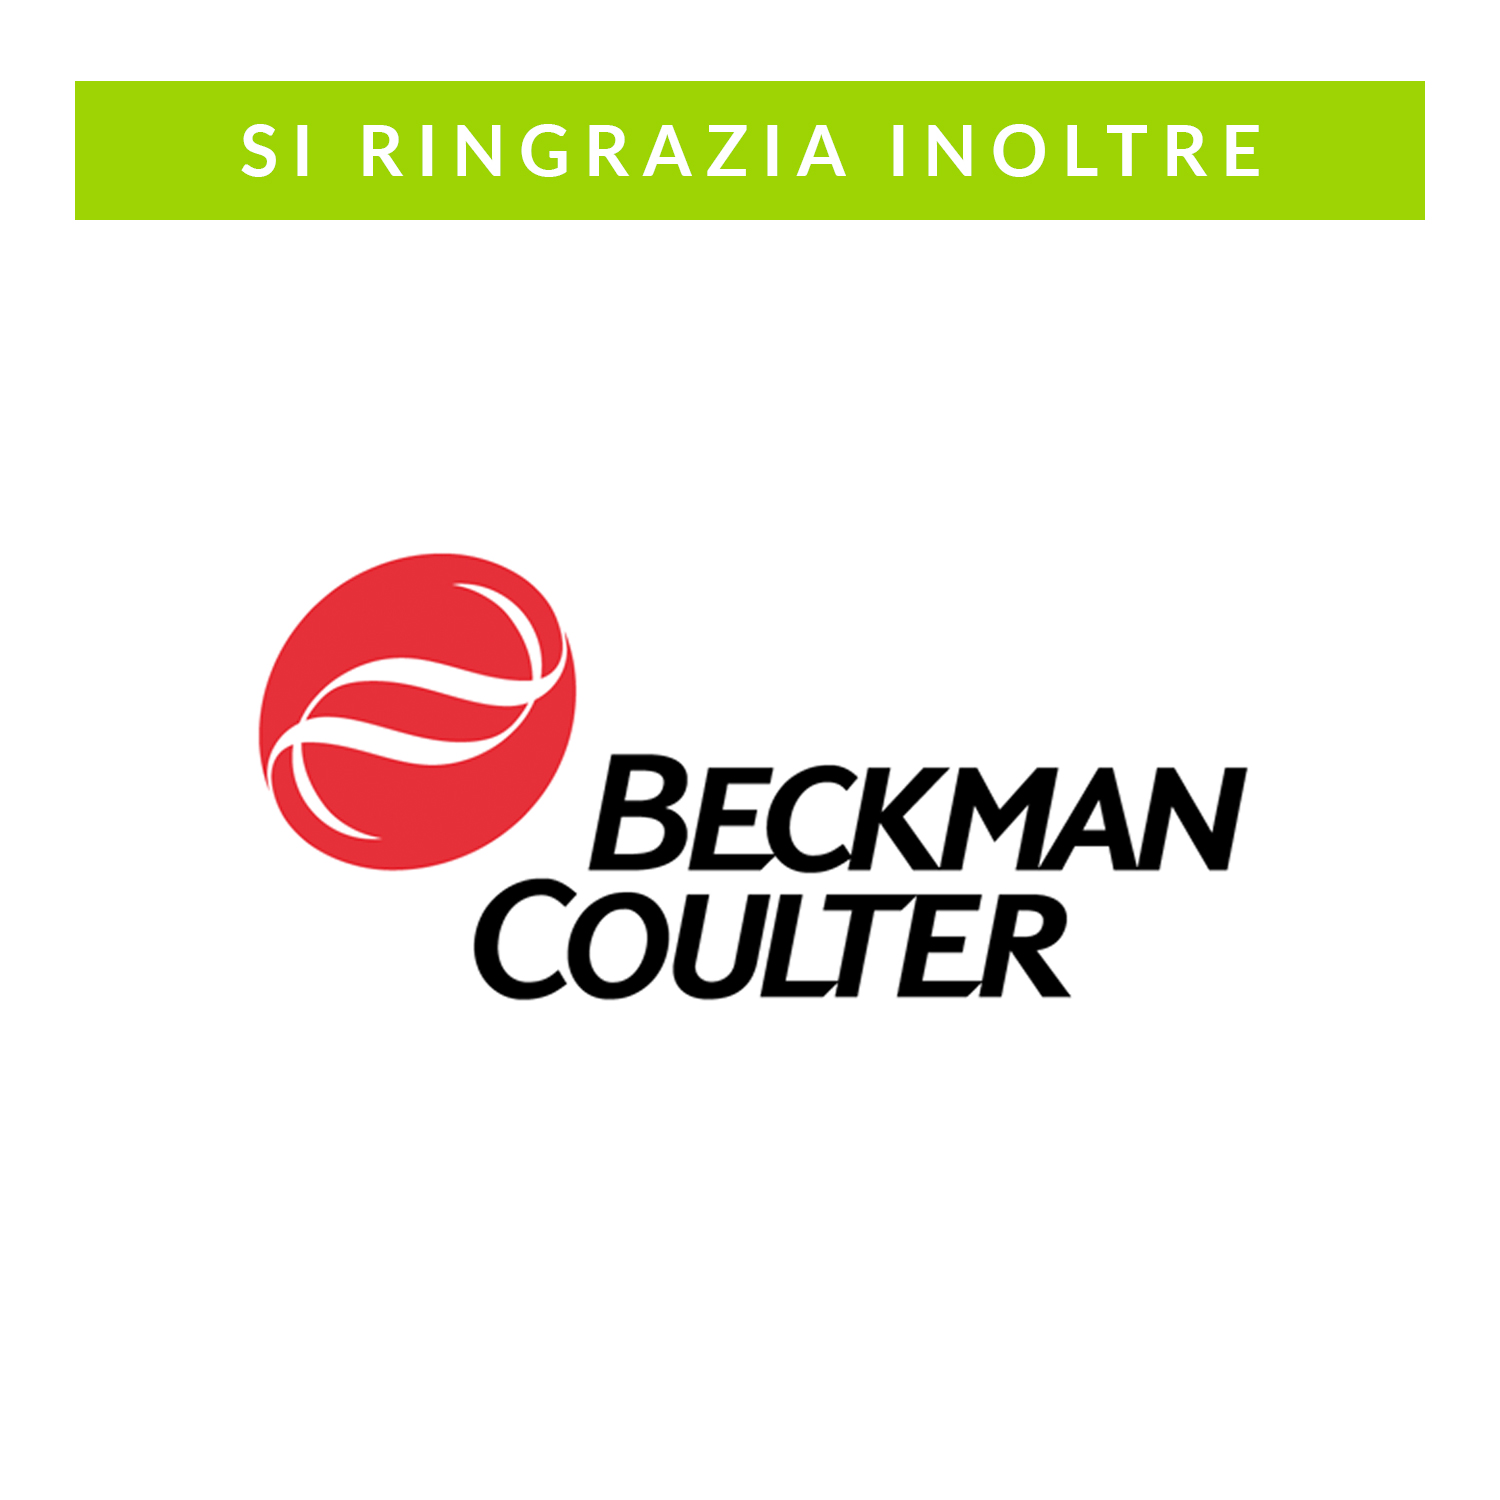 beckman-coulter